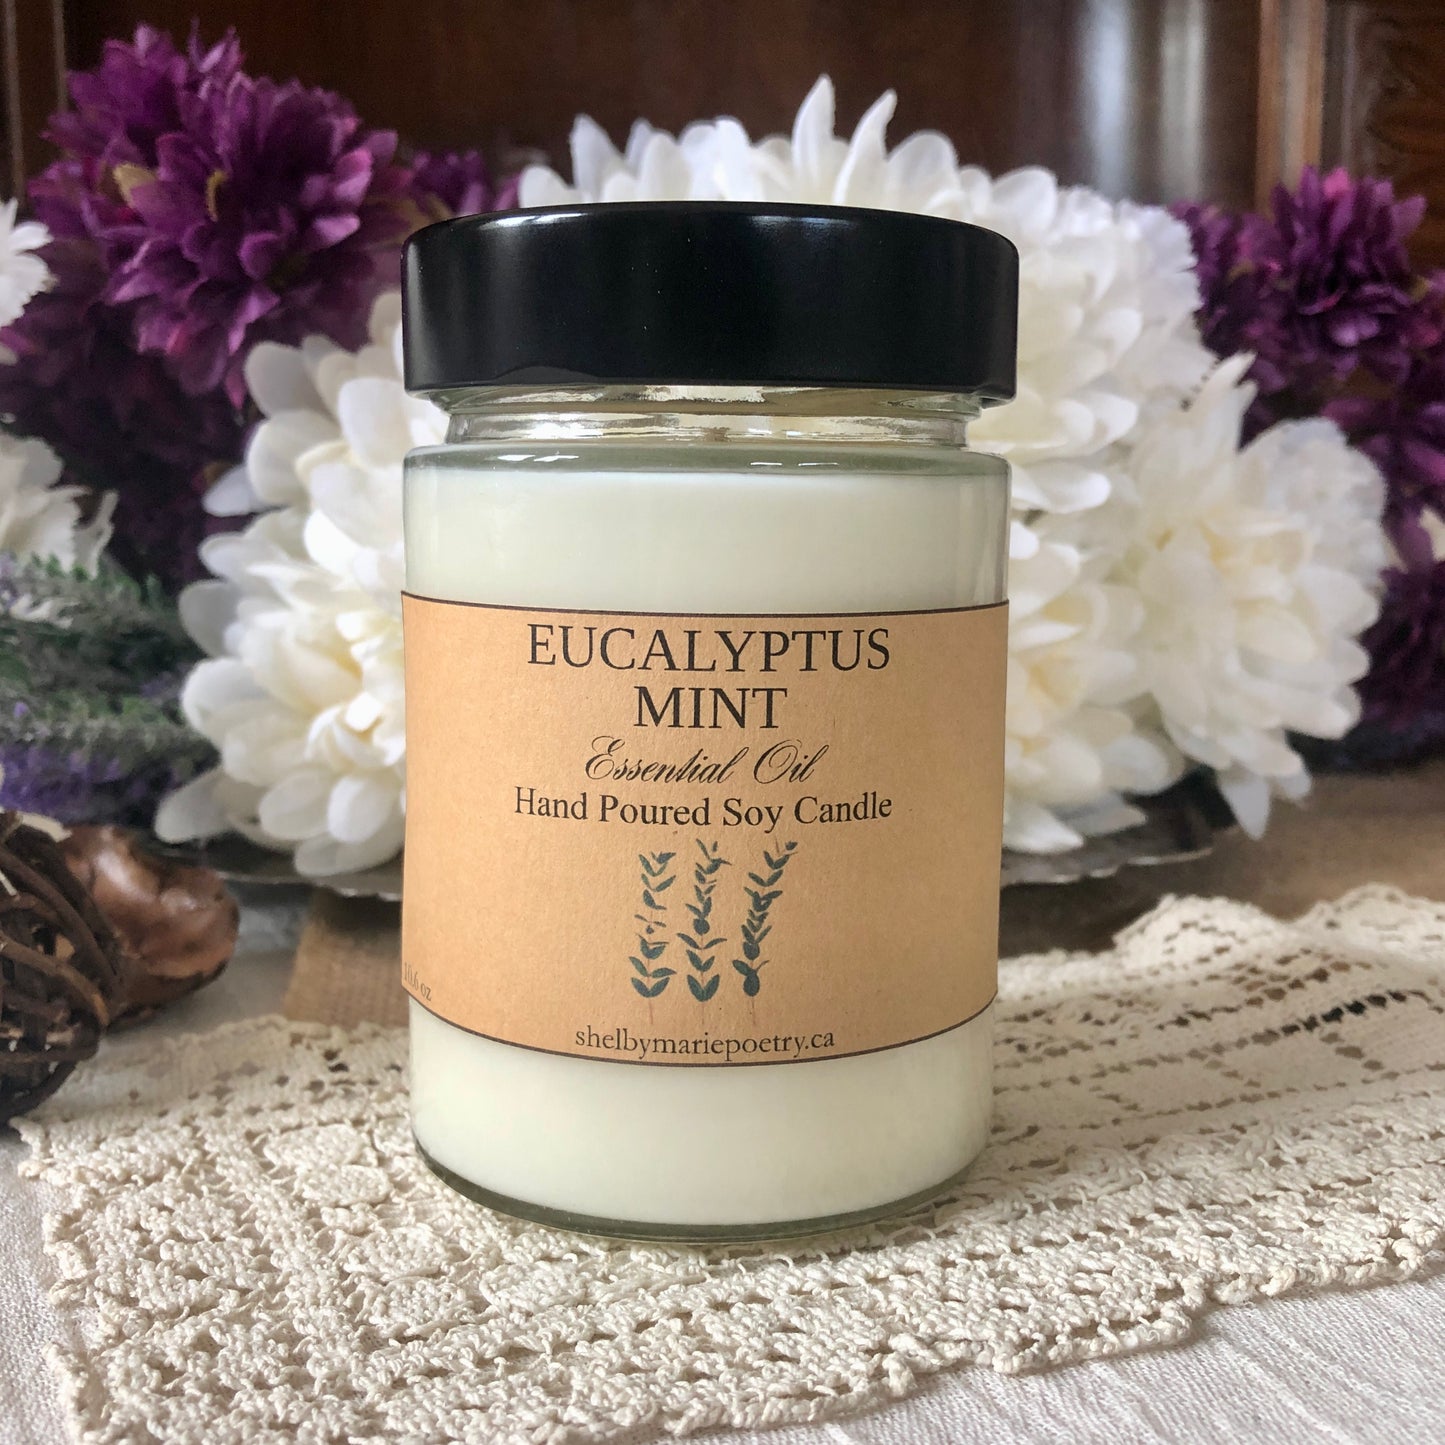 Eucalyptus Mint Essential Oil Soy Candle